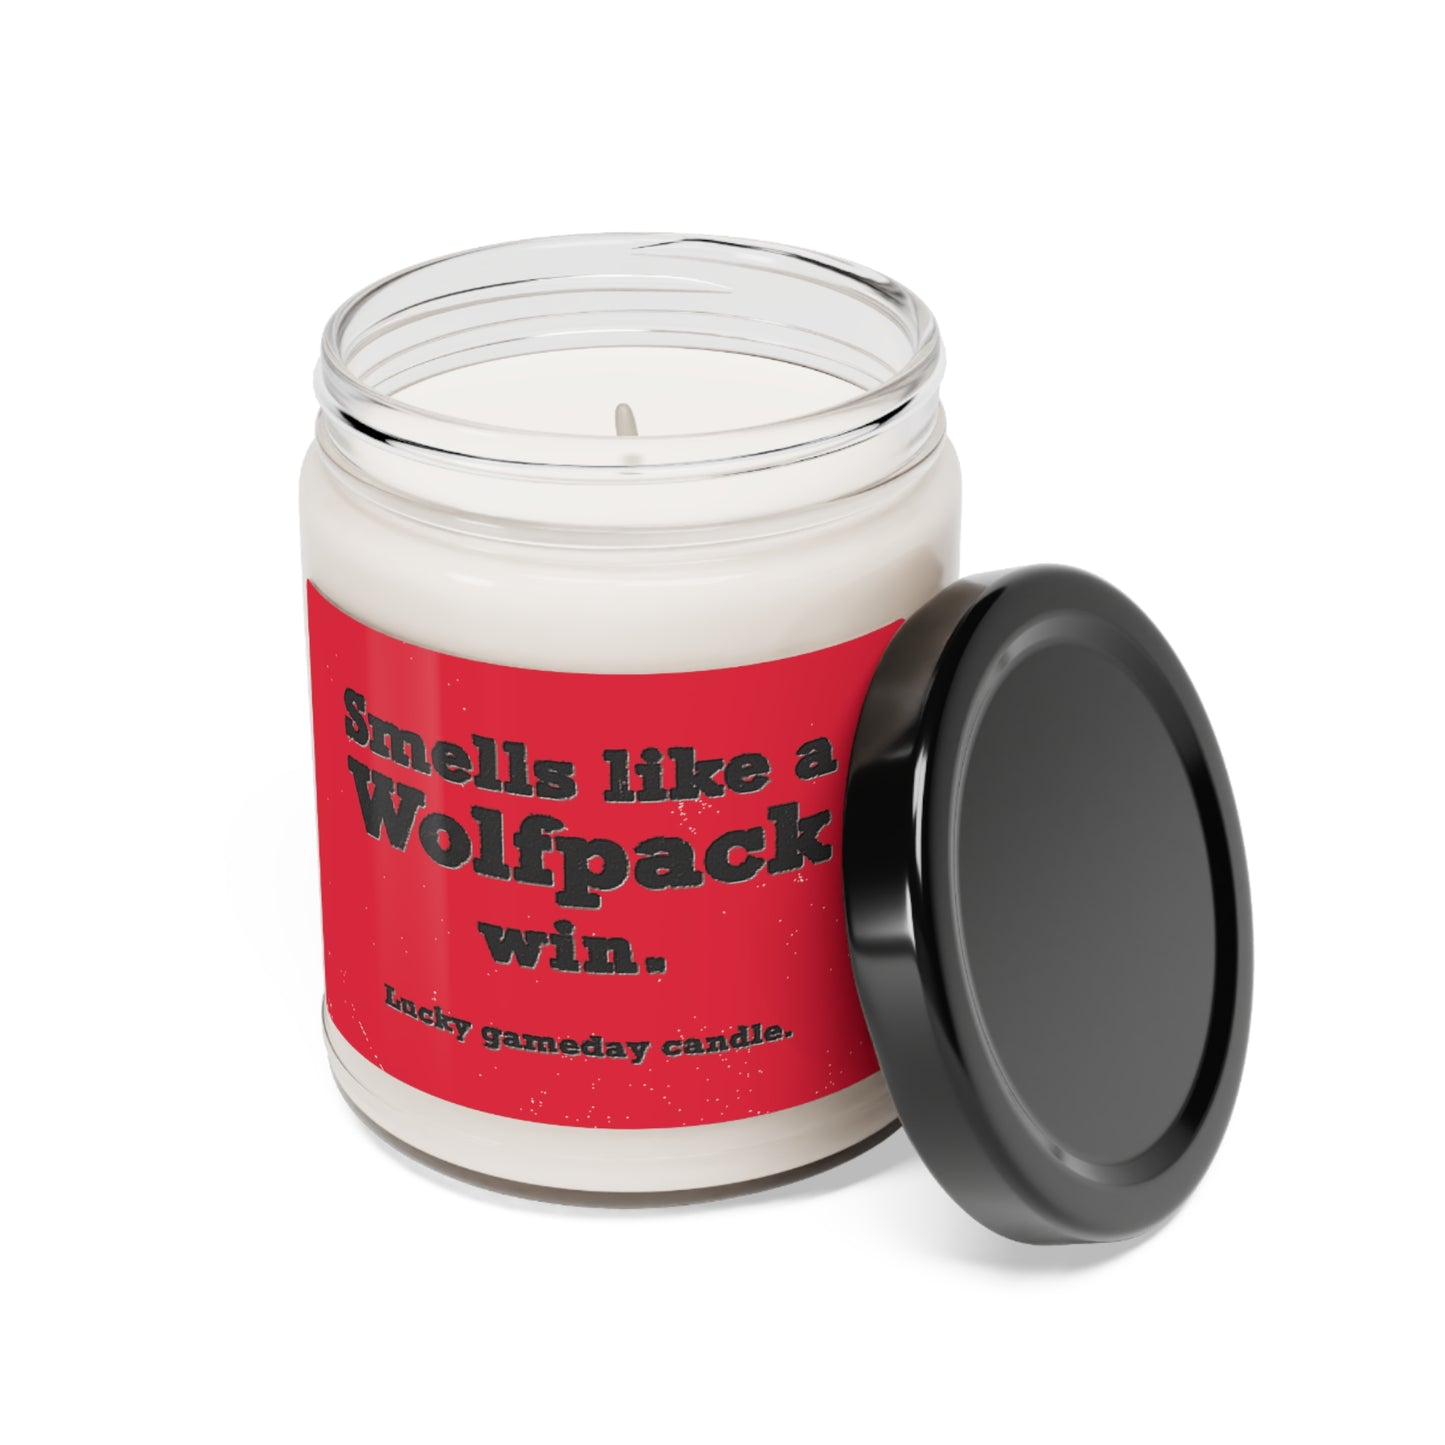 NC State - "Smells Like a Wolfpack Win" Scented Candle